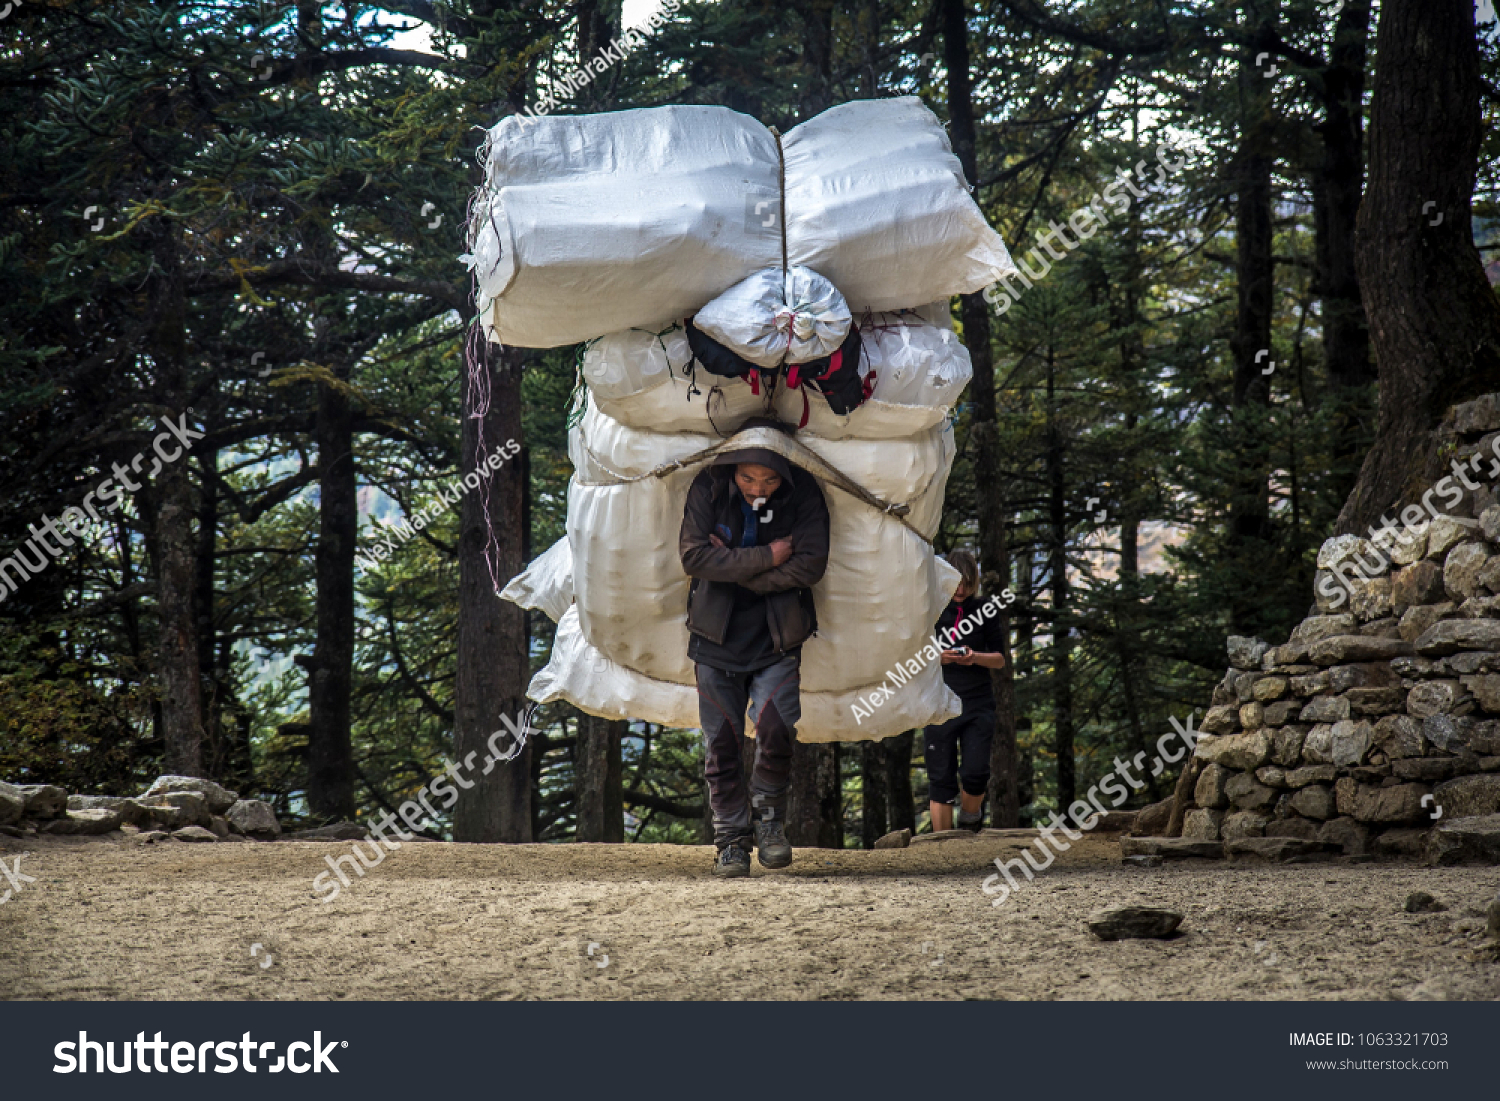 stock-photo-tengboche-nepal-november-porter-with-extremely-heavy-load-walks-along-the-path-on-his-1063321703.jpg